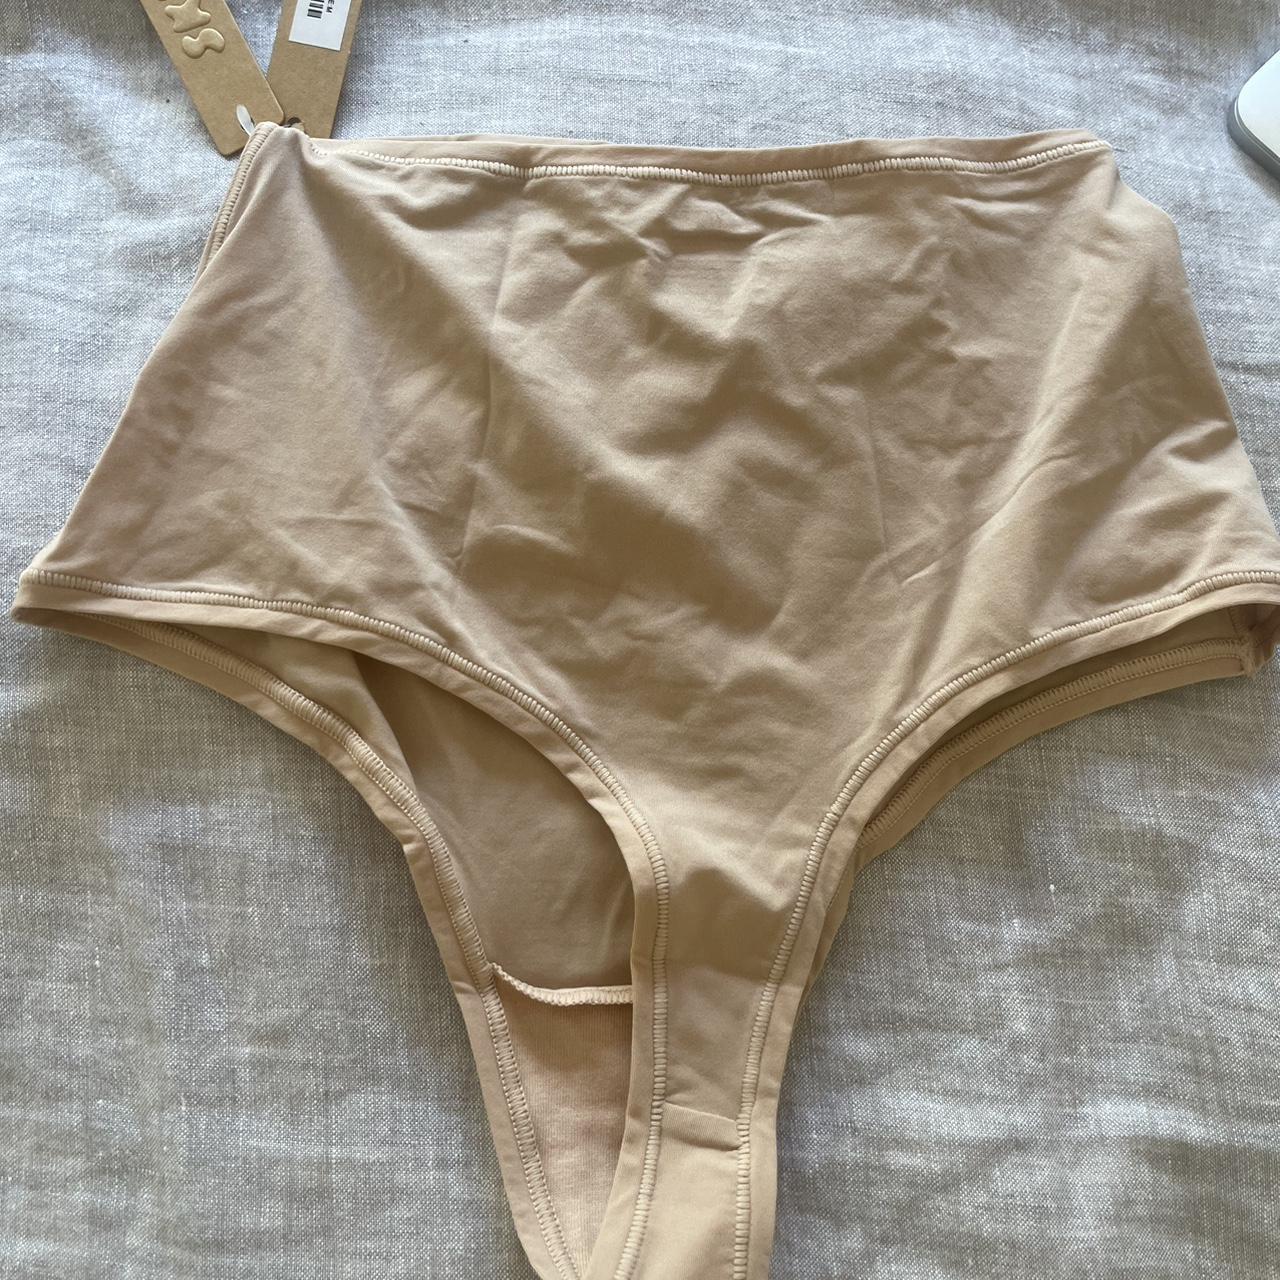 SKIMS BRAND NEW COLOUR CLAY SIZE M - Depop